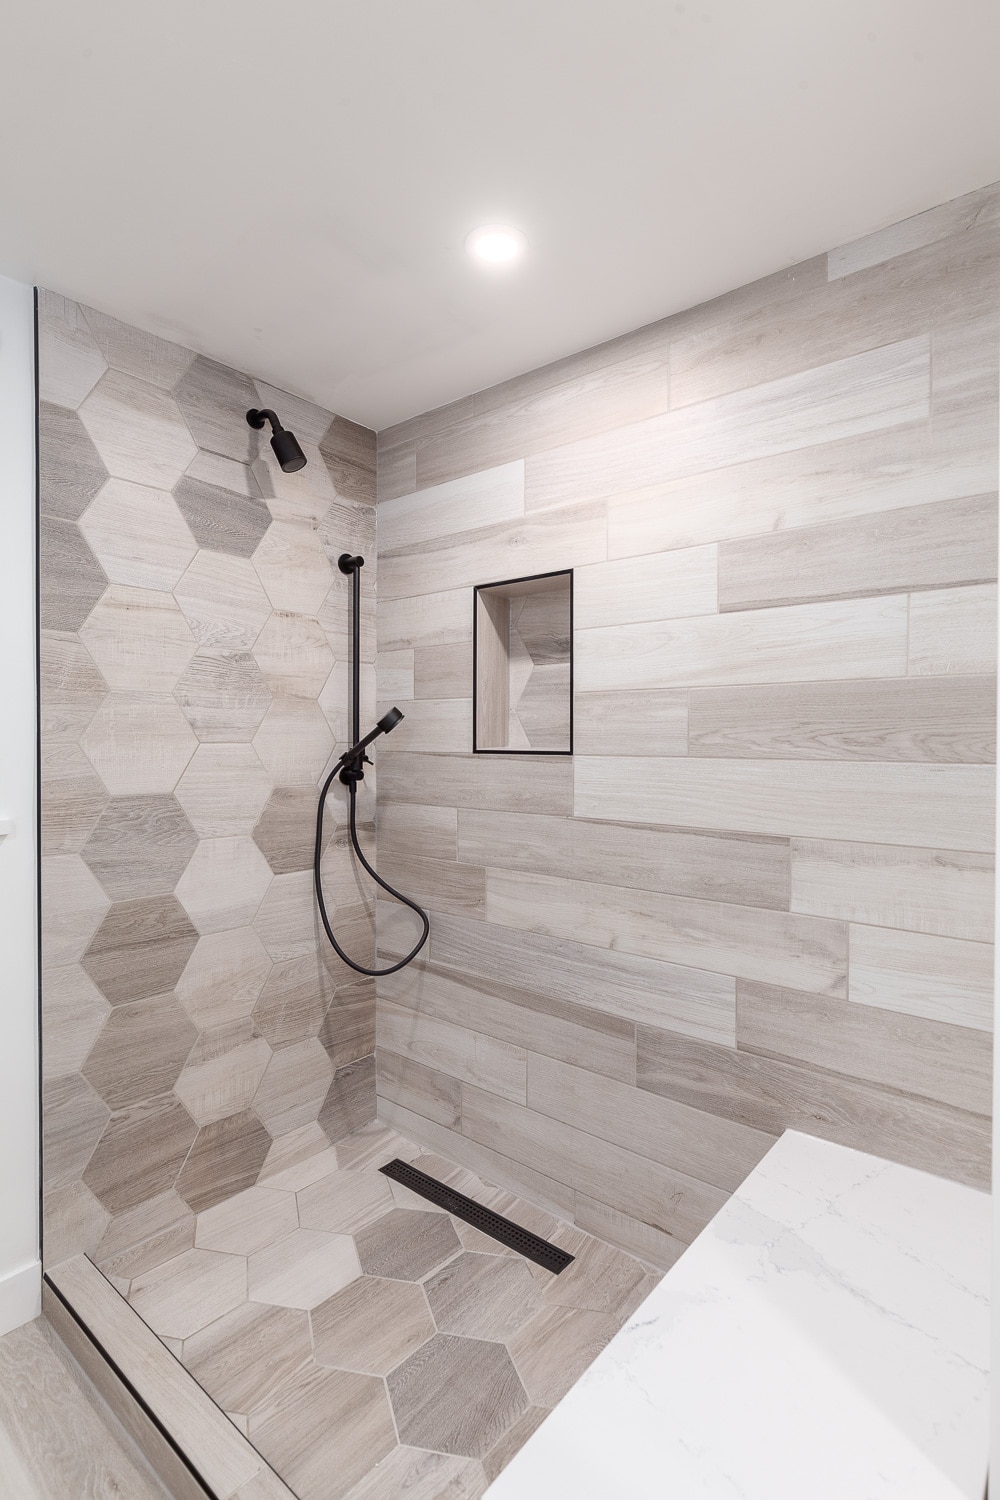 Completed Vancouver Bathroom Remodeling Services by Canadian Home Style